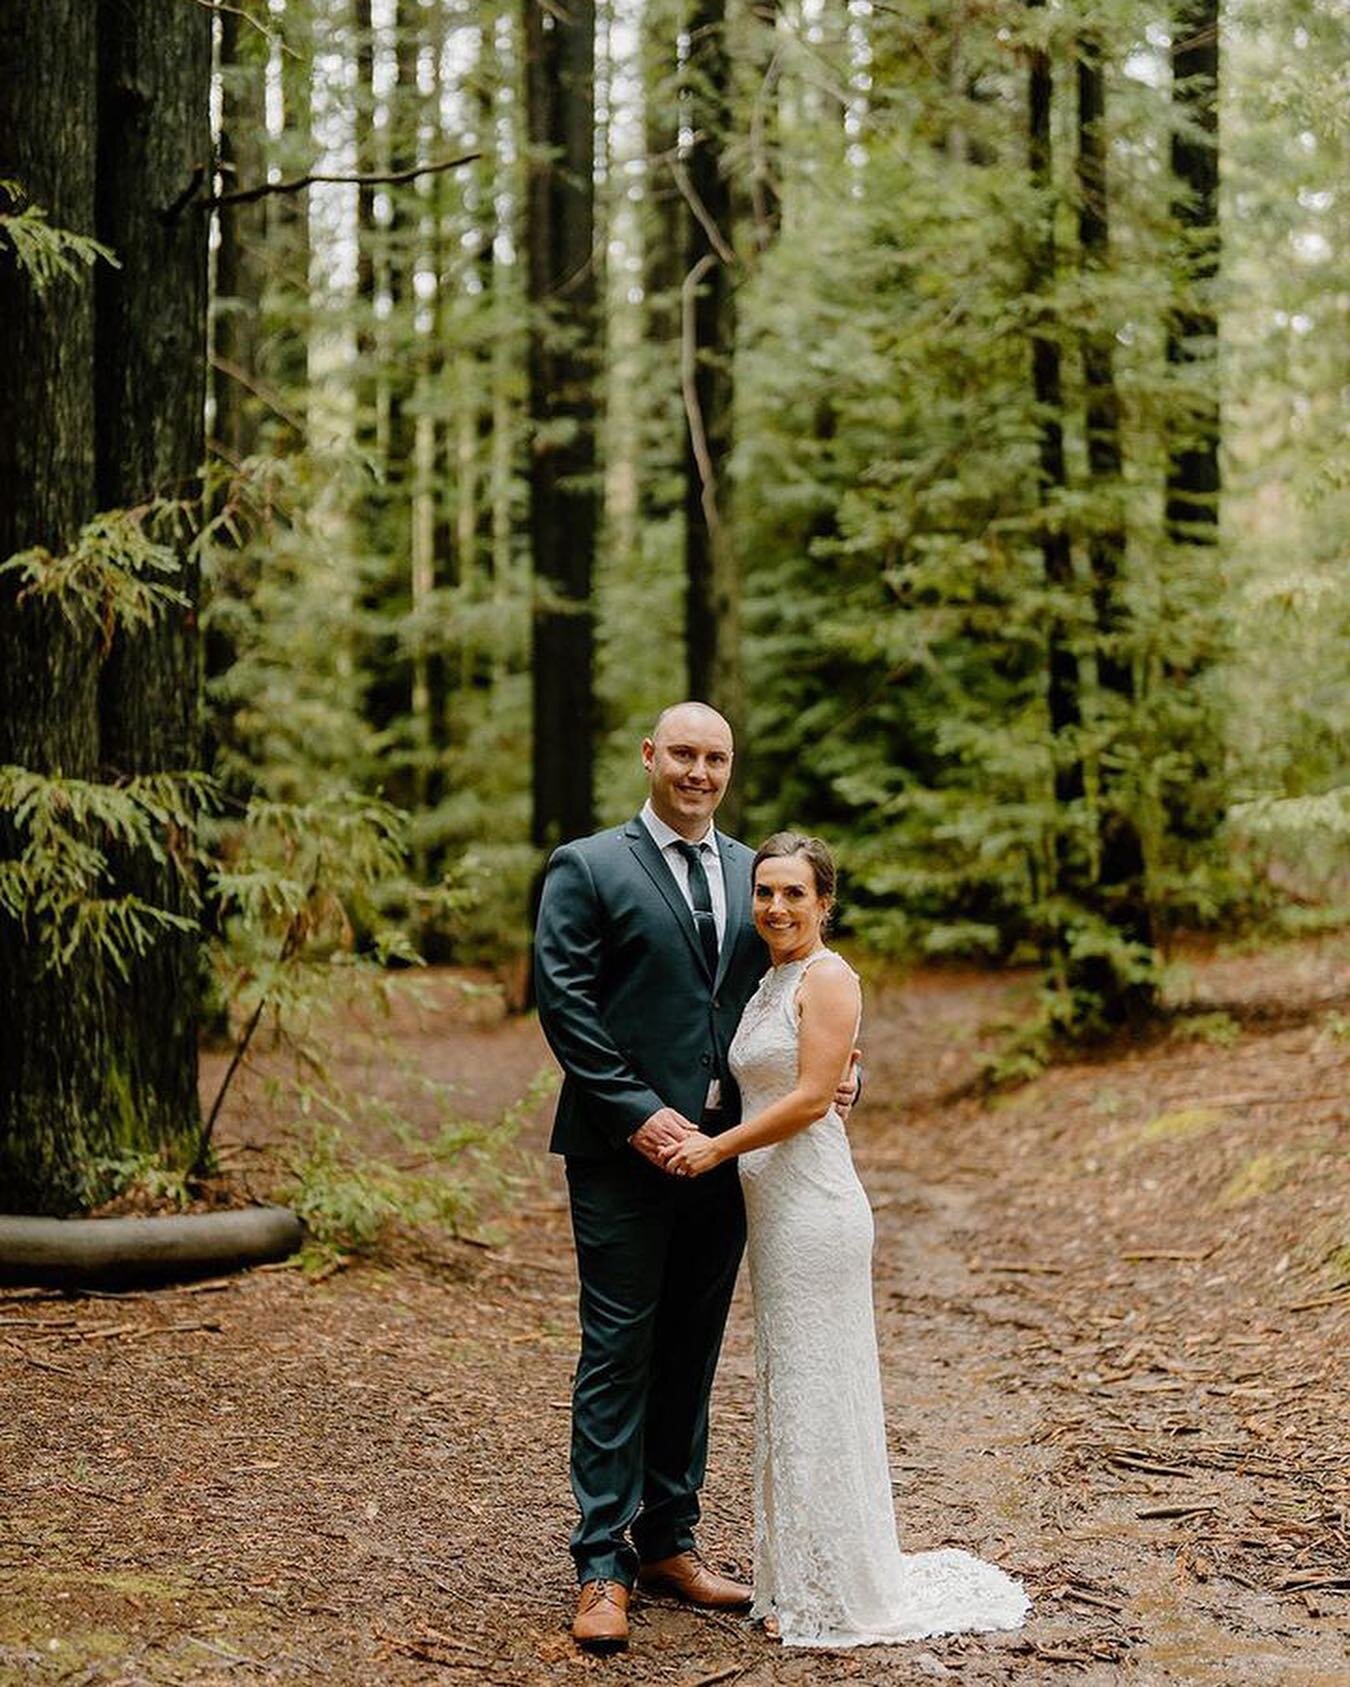 This is certainly an Elopement I won&rsquo;t forget🙈
Aaron and Meaghan&rsquo;s ceremony in the Magic Forest was nothing short of memorable. It&rsquo;s was a rain, hail and shine kind of day, with floodwaters, fallen trees and plenty of mosquitos all